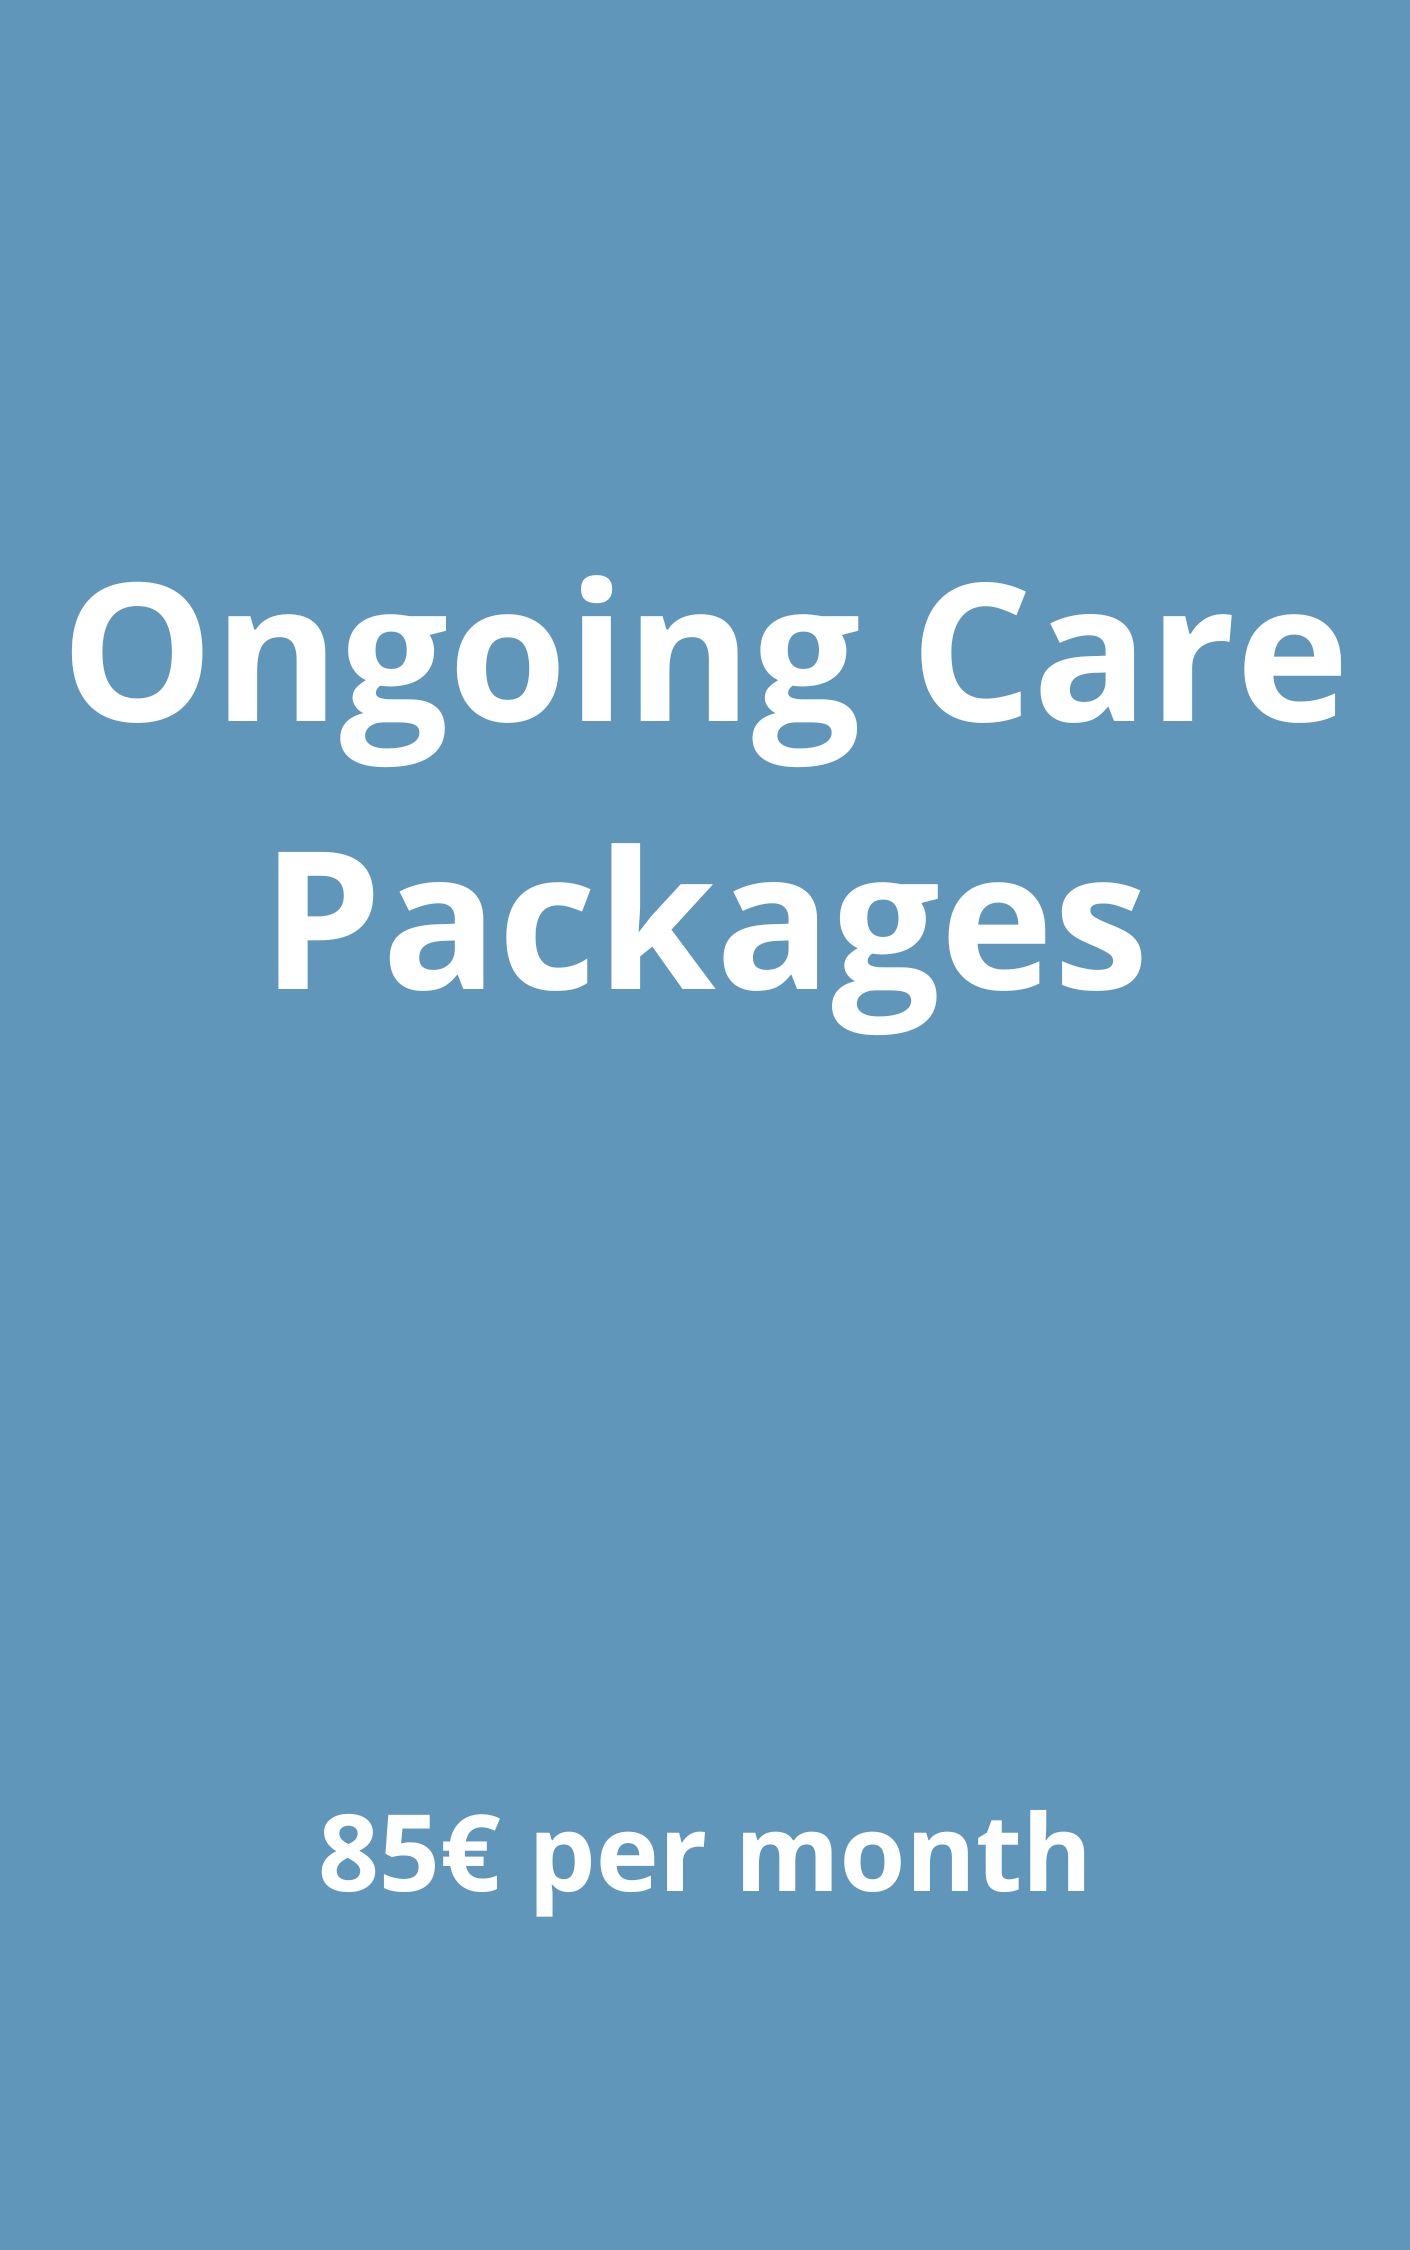 Ongoing care packages for regular osteopathic treatment in Valbonne